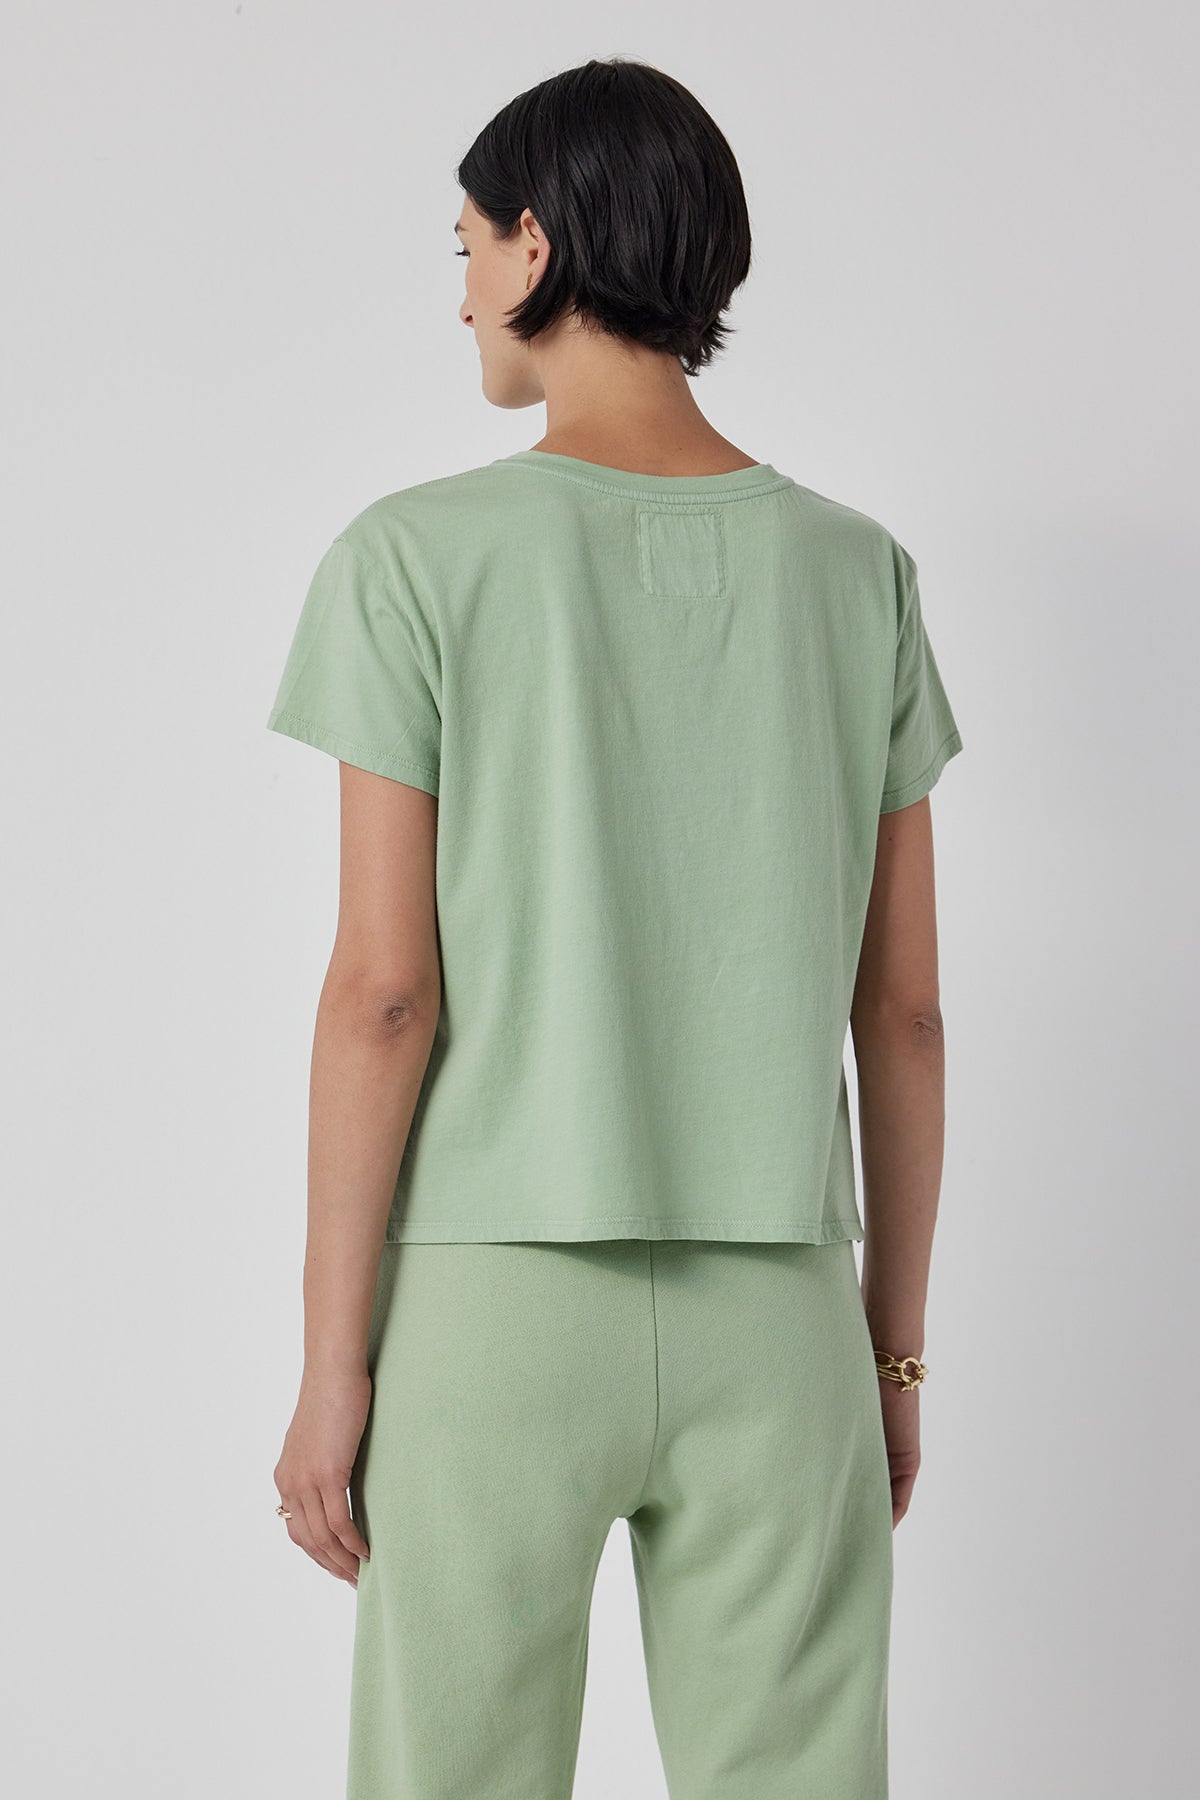 The back view of a woman wearing a green Velvet by Jenny Graham TOPANGA TEE and sweatpants.-36212387250369